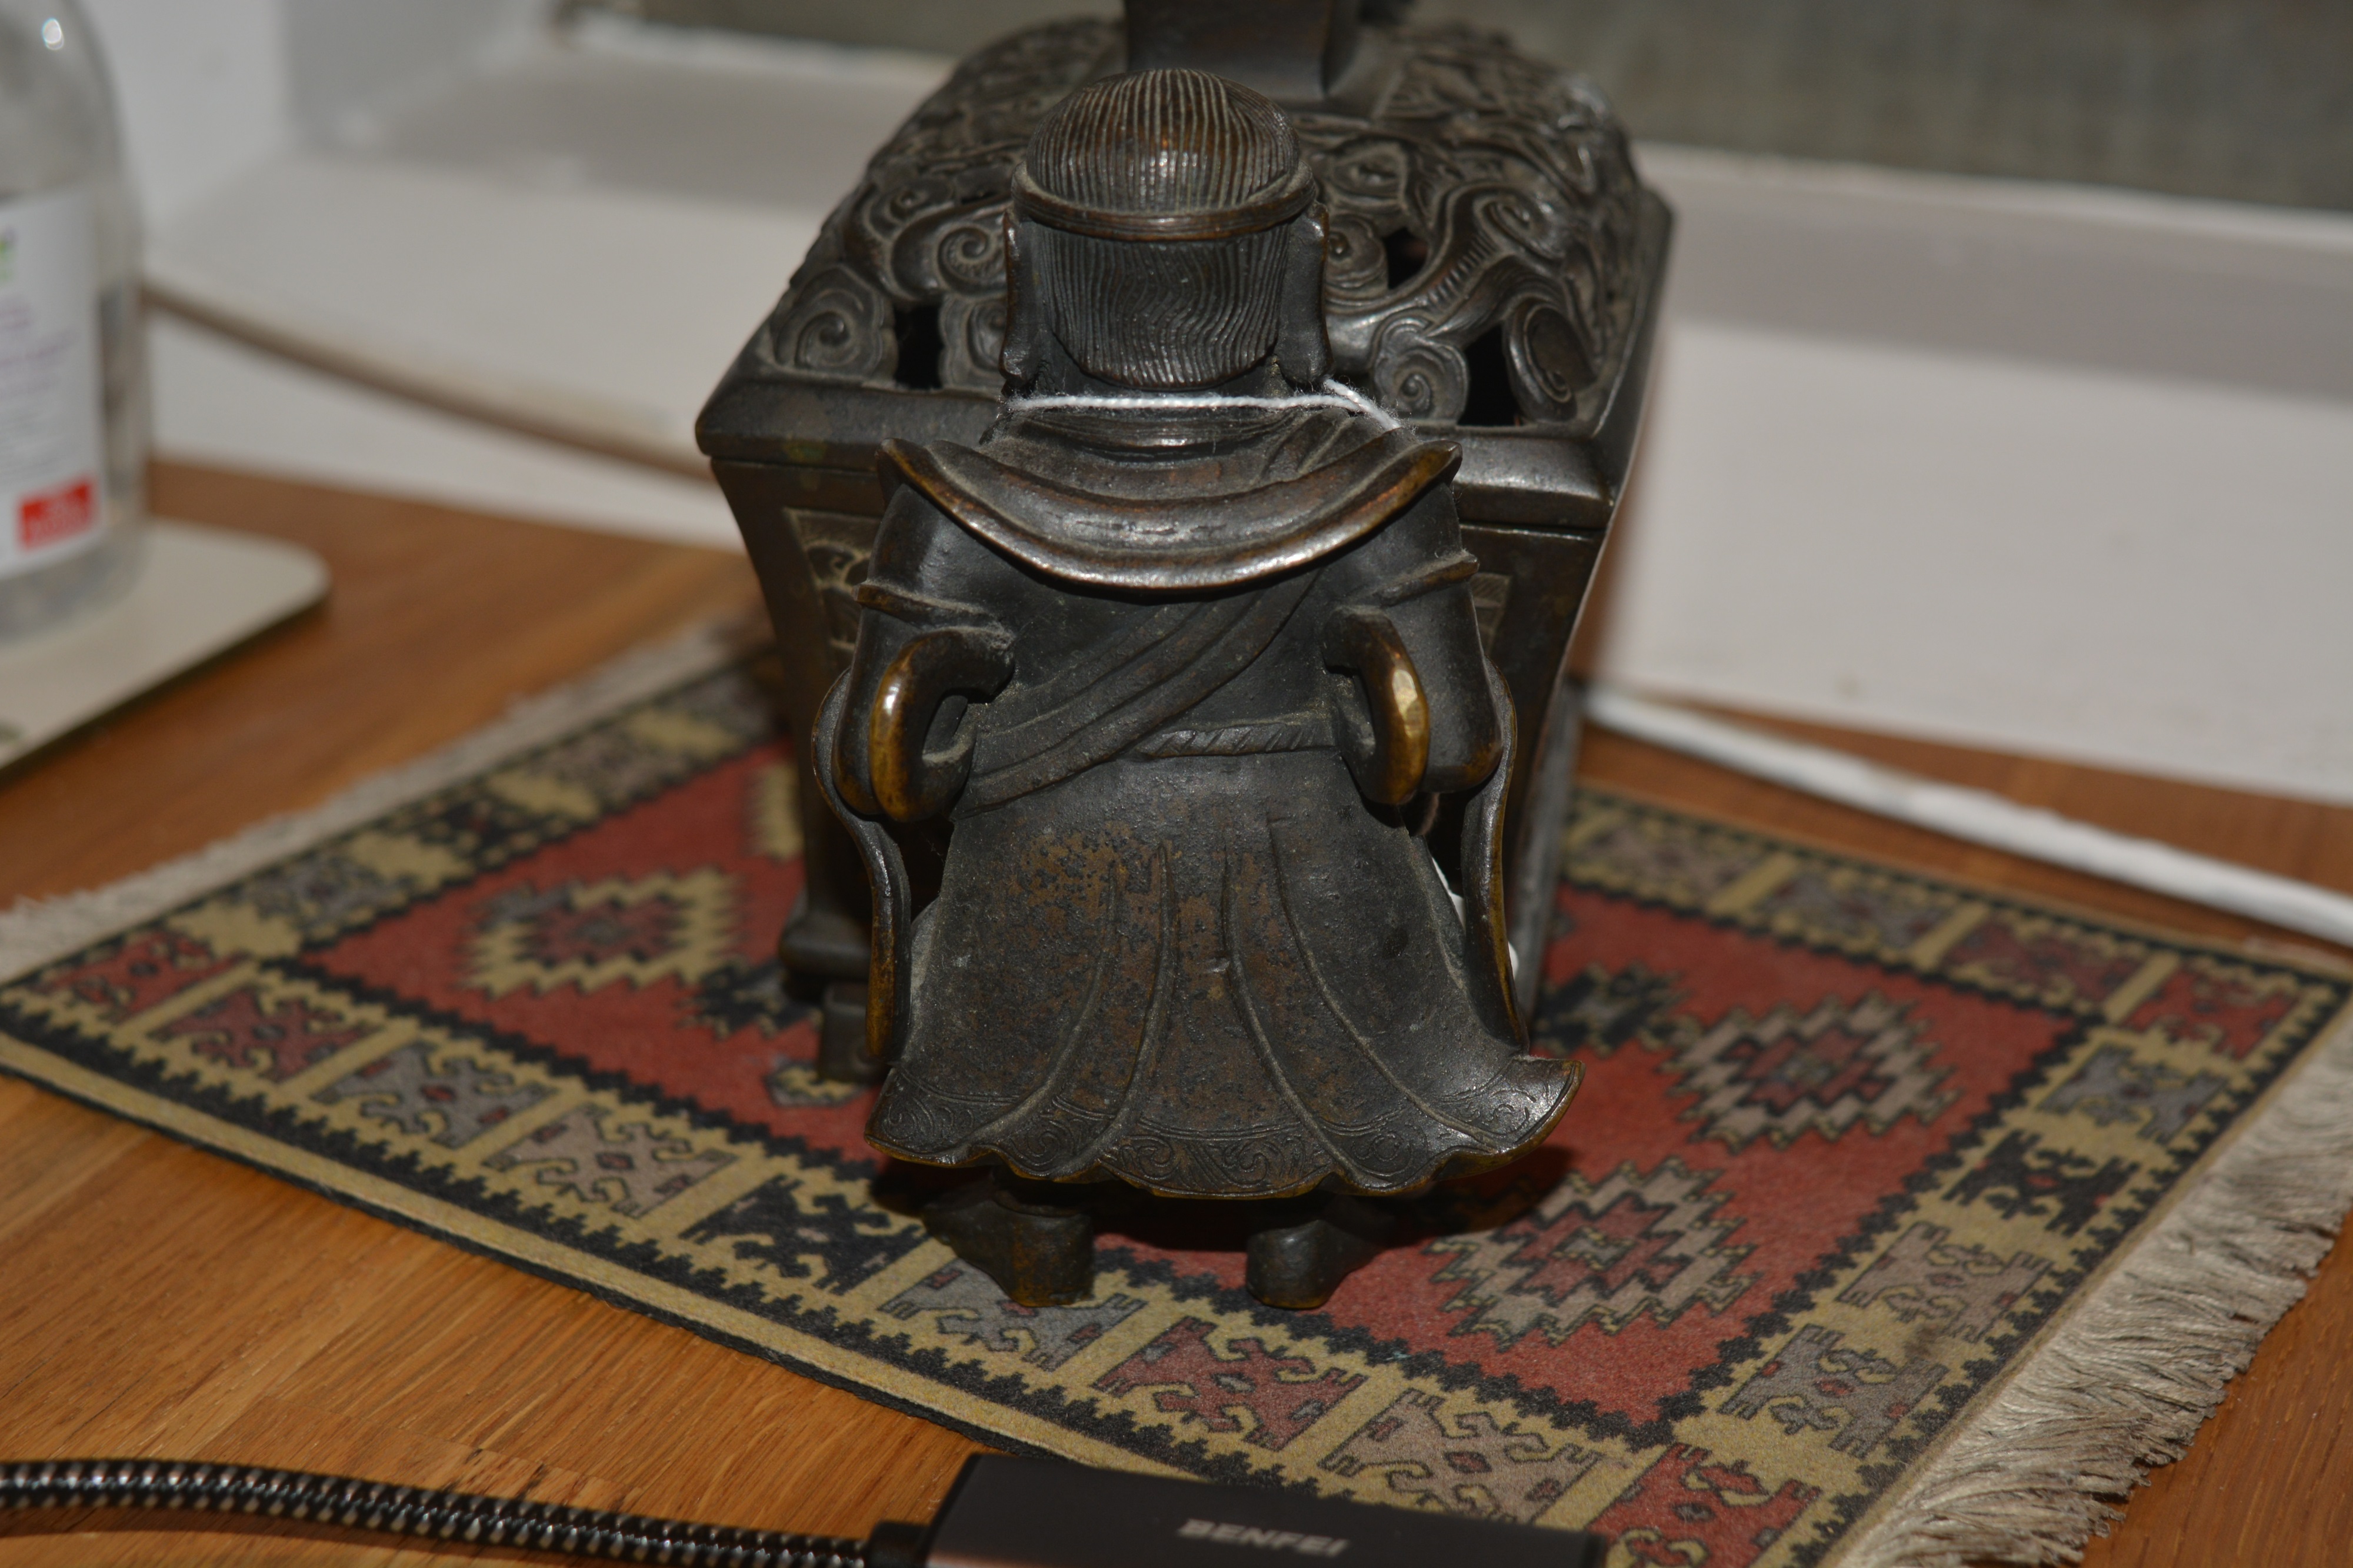 Bronze censer Chinese, 18th/19th Century in the form of a central rectangular casket with a - Image 11 of 27